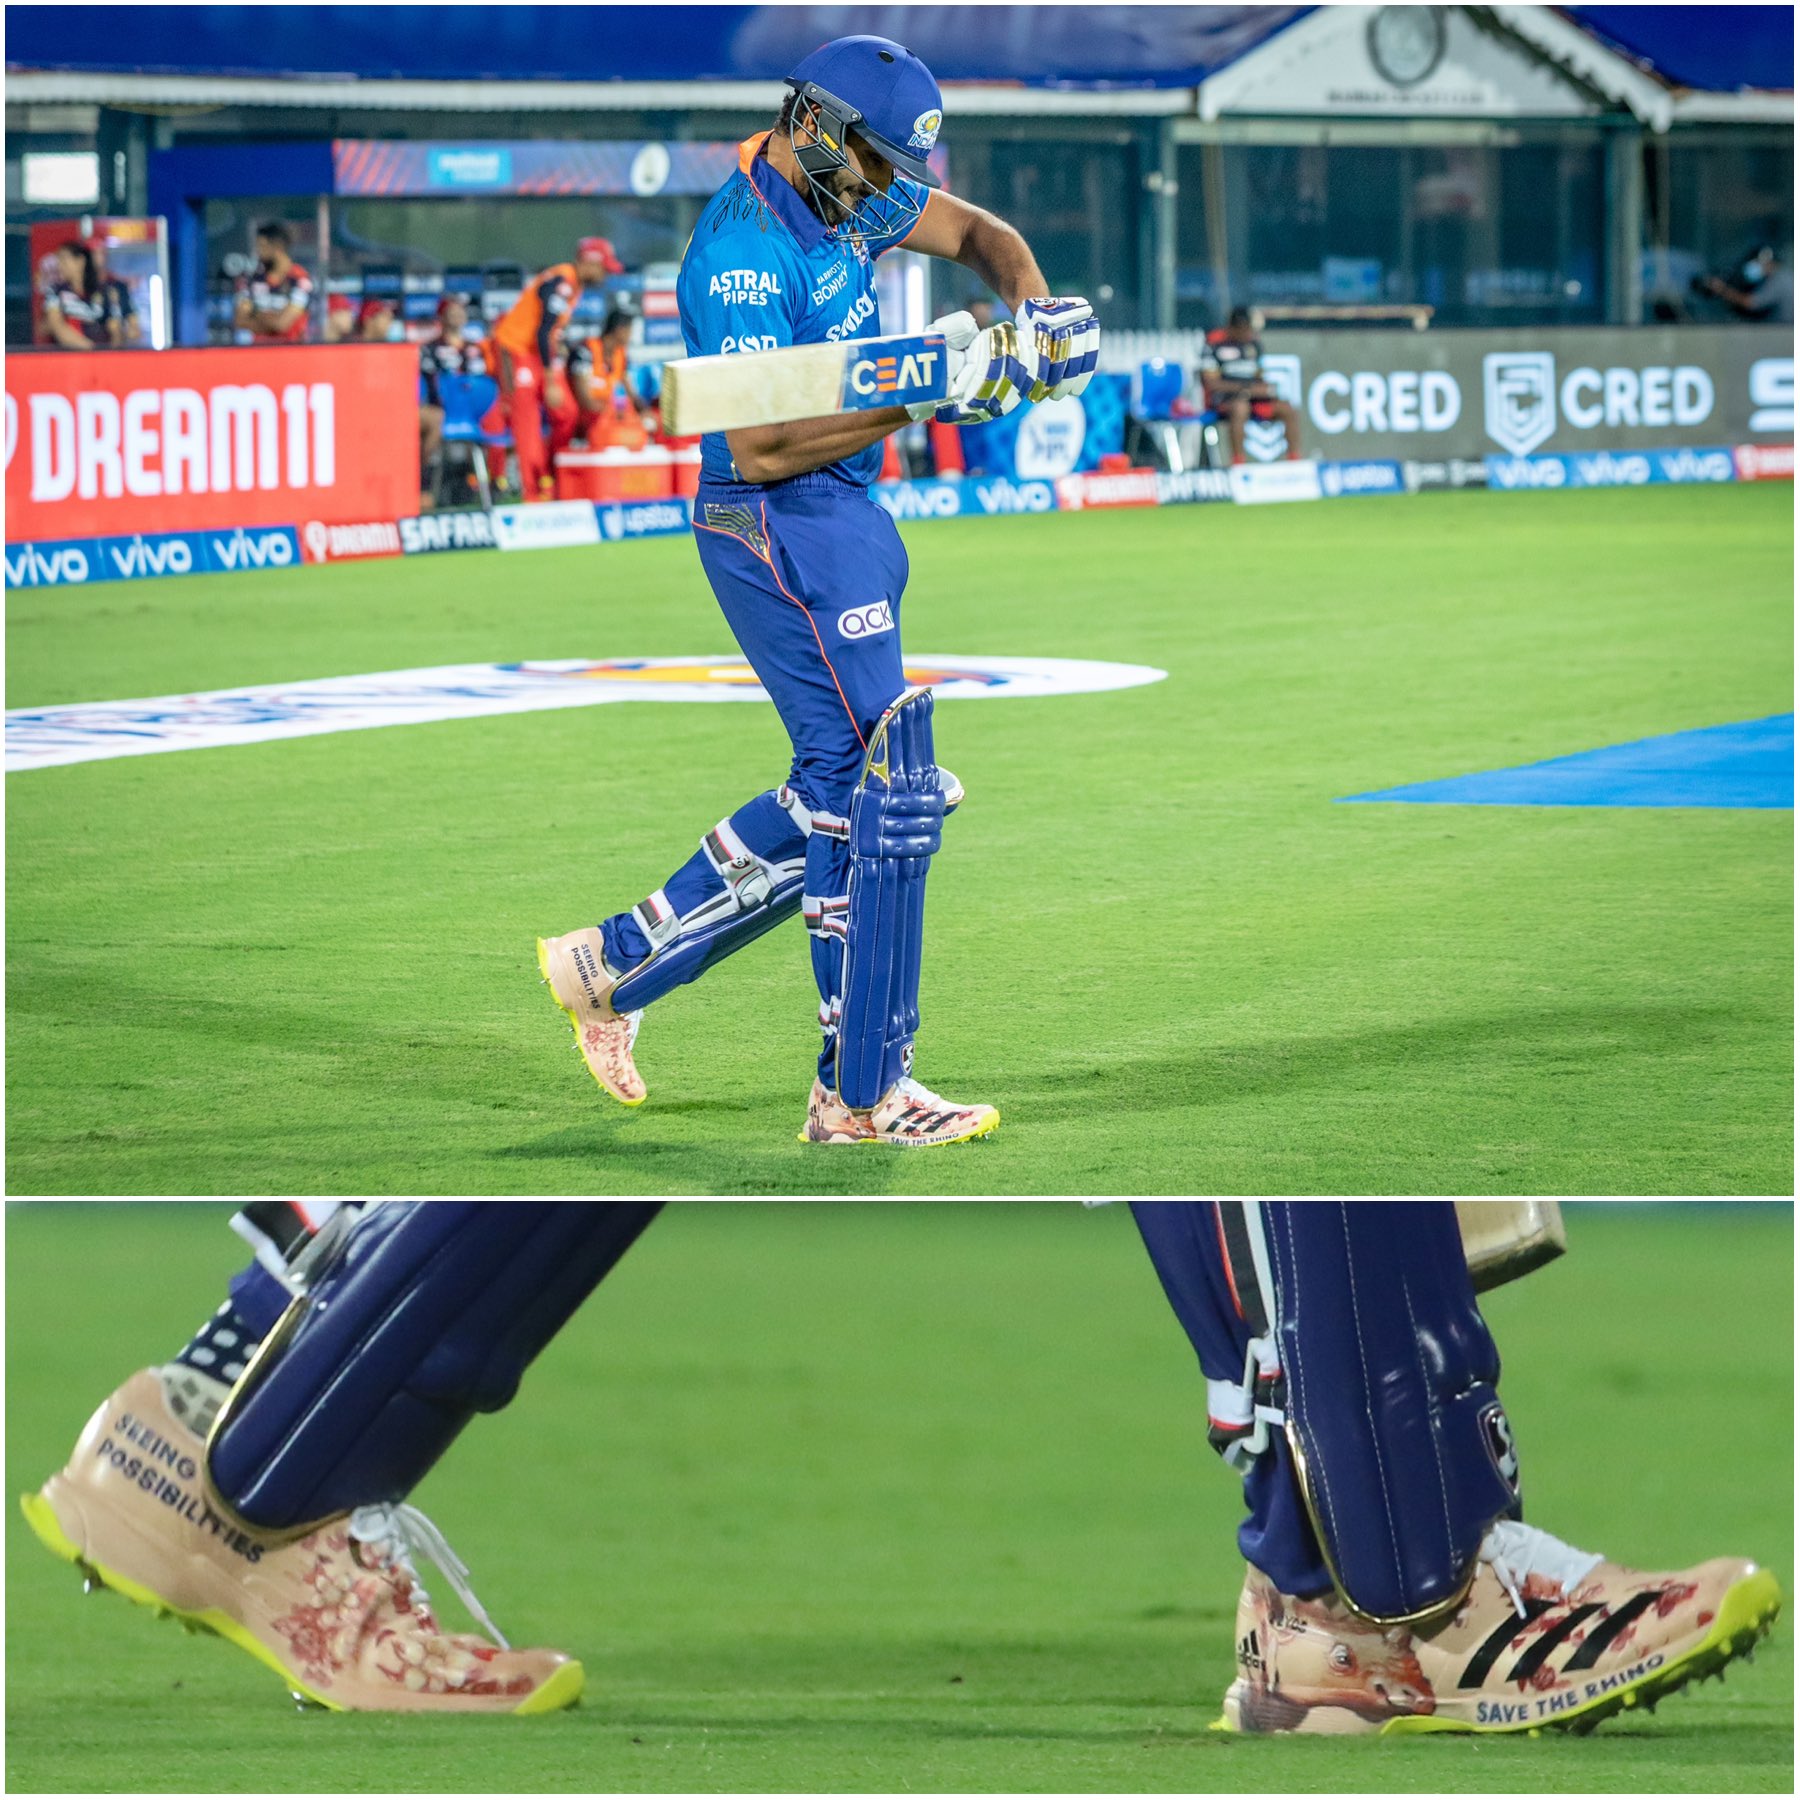 Rohit Sharma shares third message for environment on his shoes